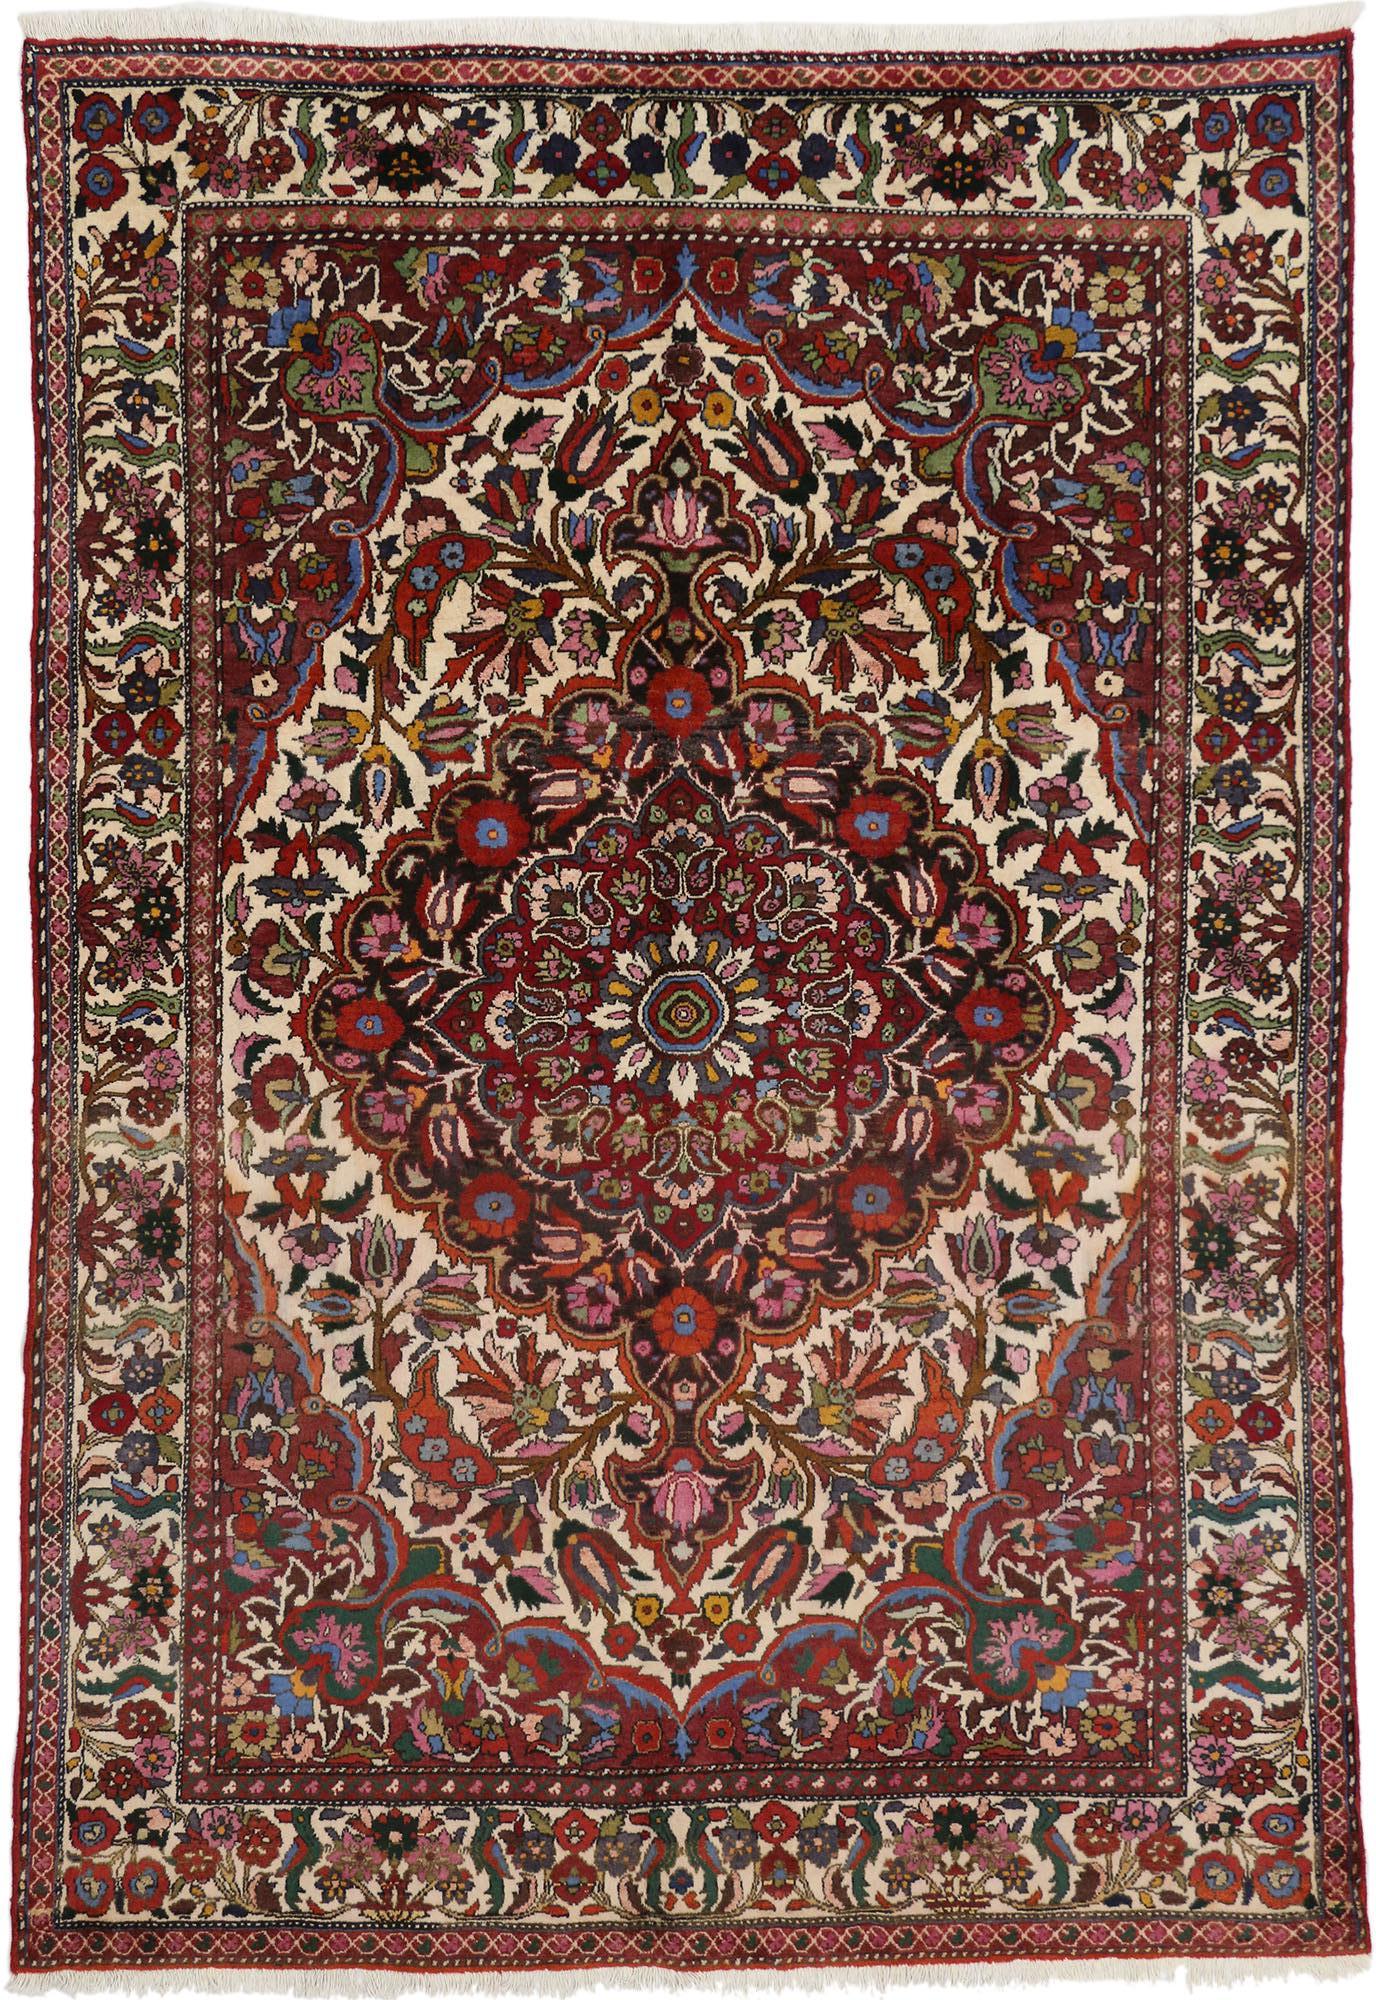 71962 Vintage Persian Bakhtiari Rug, 07'03 x 10'04. Persian Bakhtiari rugs, originating from the rugged Zagros Mountains of Iran, are esteemed for their exquisite craftsmanship and rich cultural heritage. Handwoven by skilled artisans from the